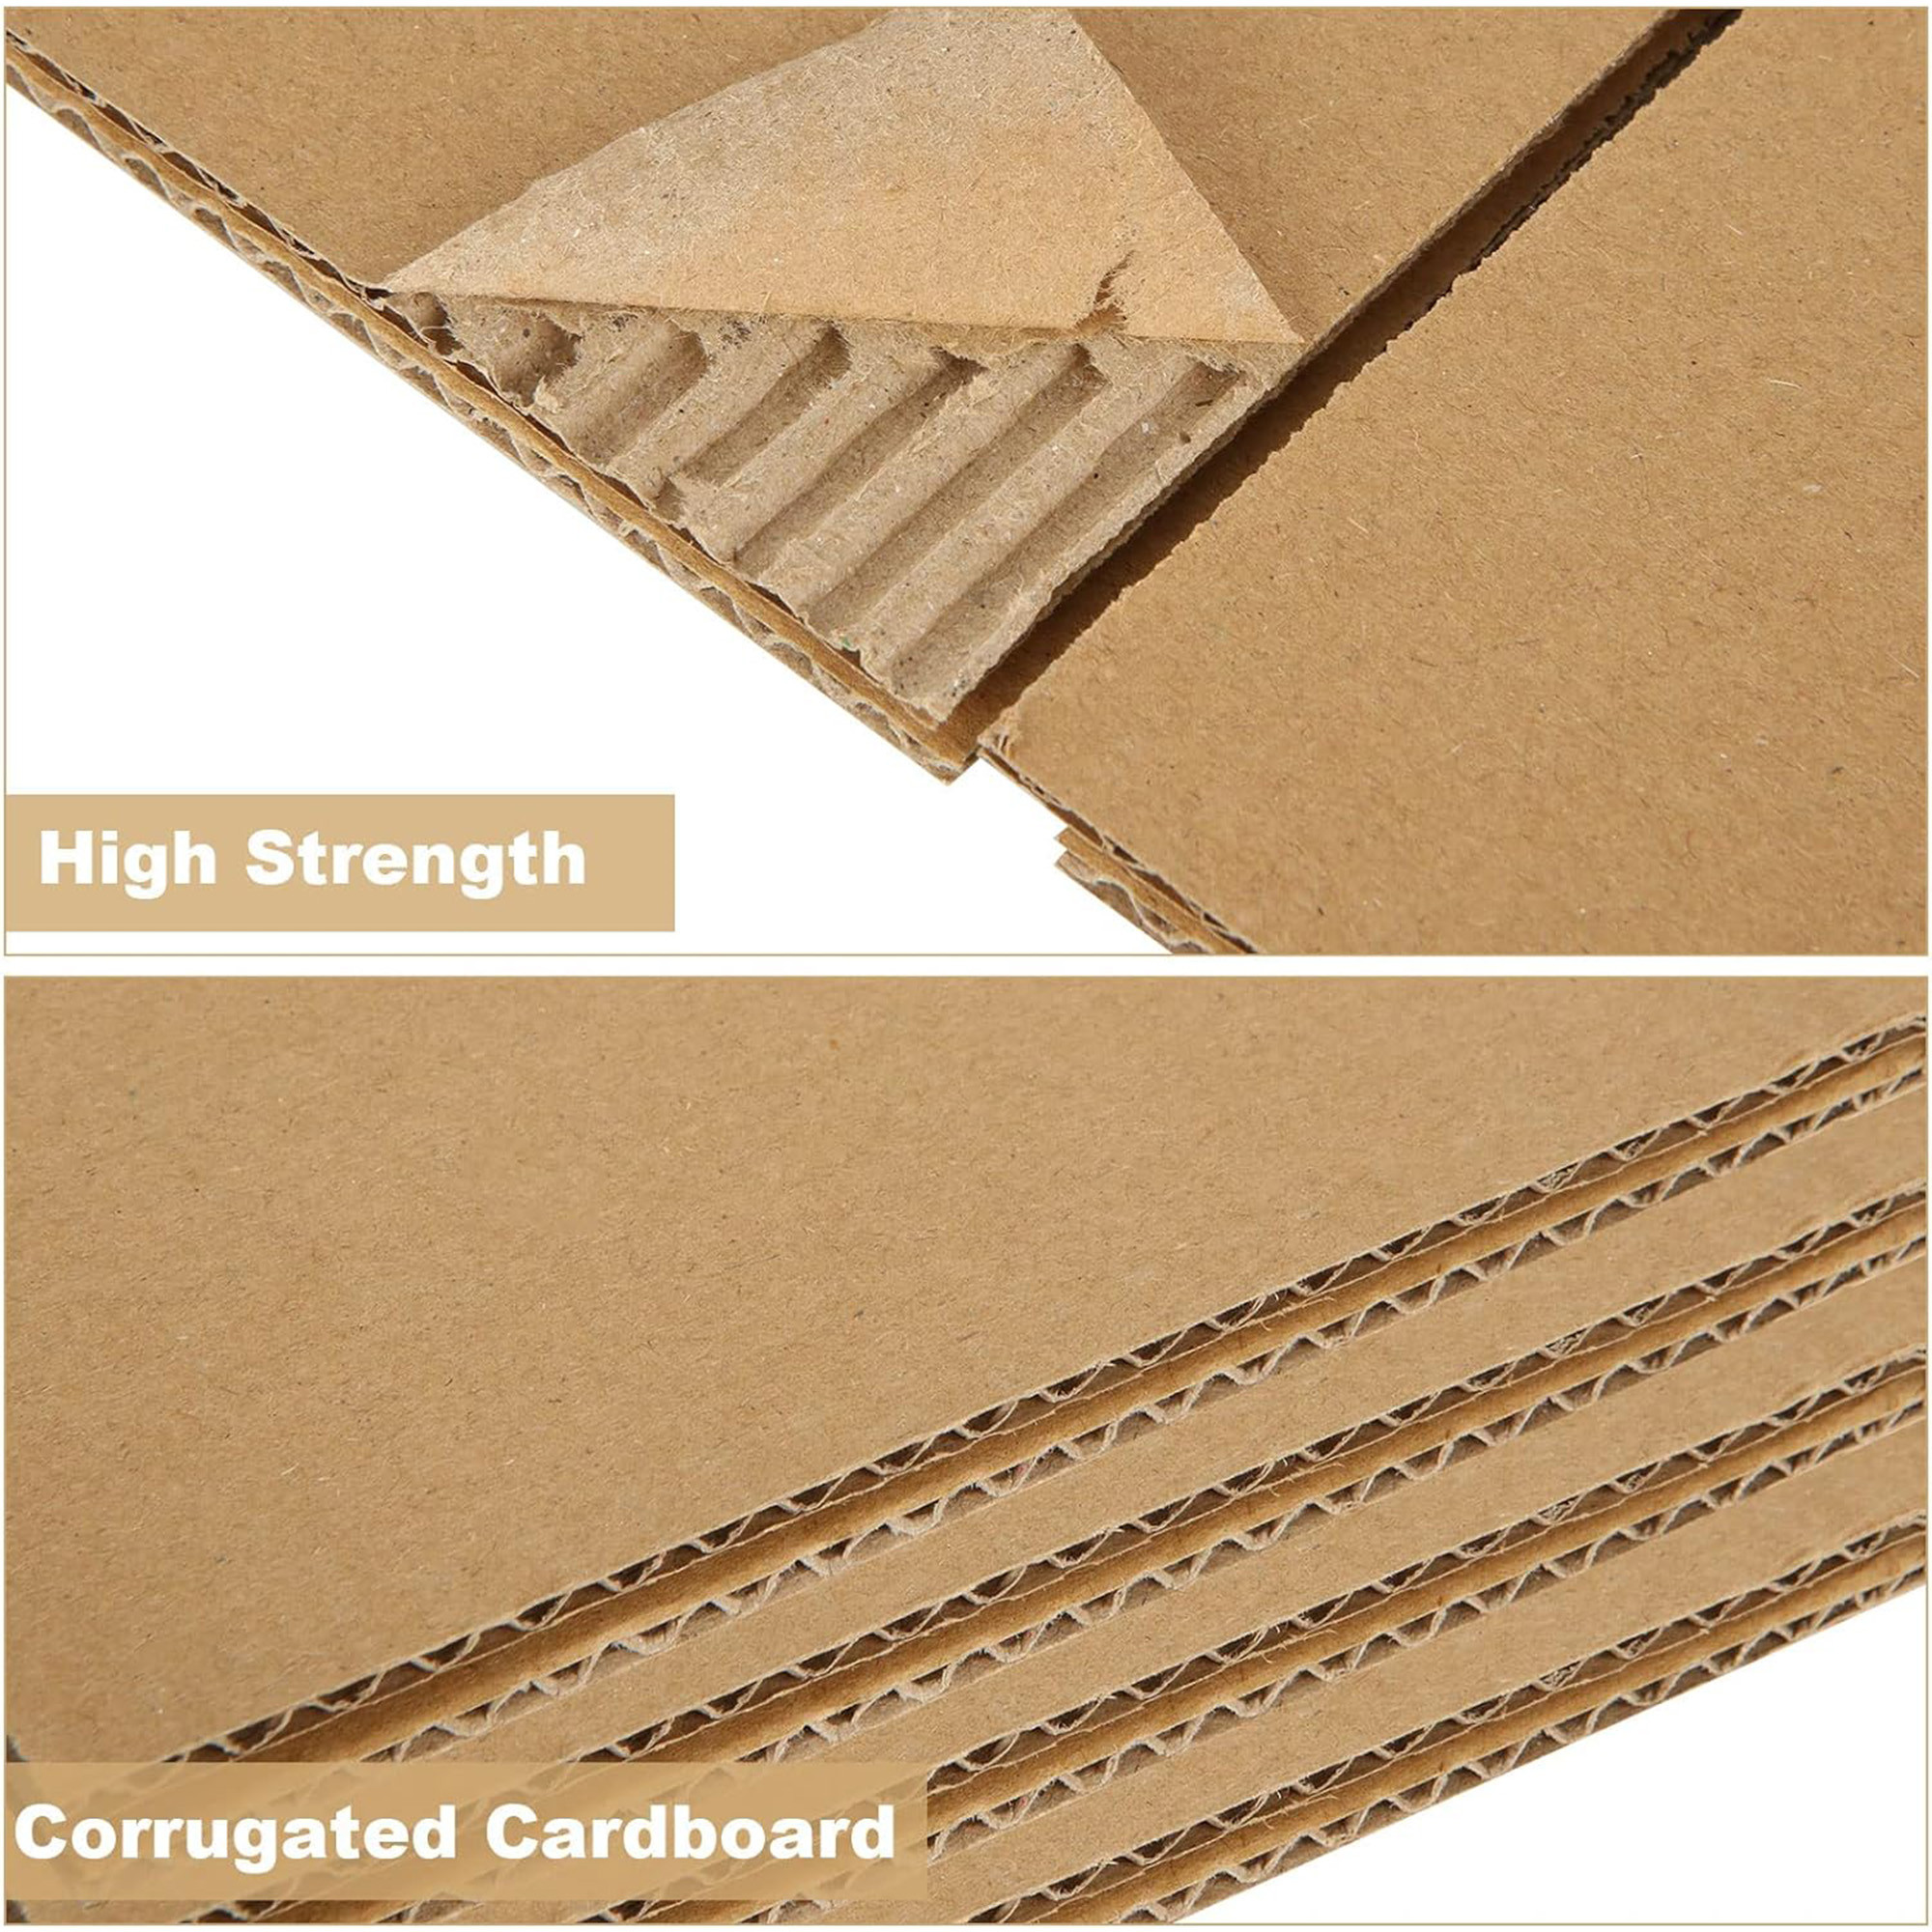 Kuber Industries Corrugated Box | 3 Ply Corrugated Packing Box | Corrugated for Shipping | Corrugated for Courier & Goods Transportation | L 6 x W 4.5 x H 6 Inch|Brown